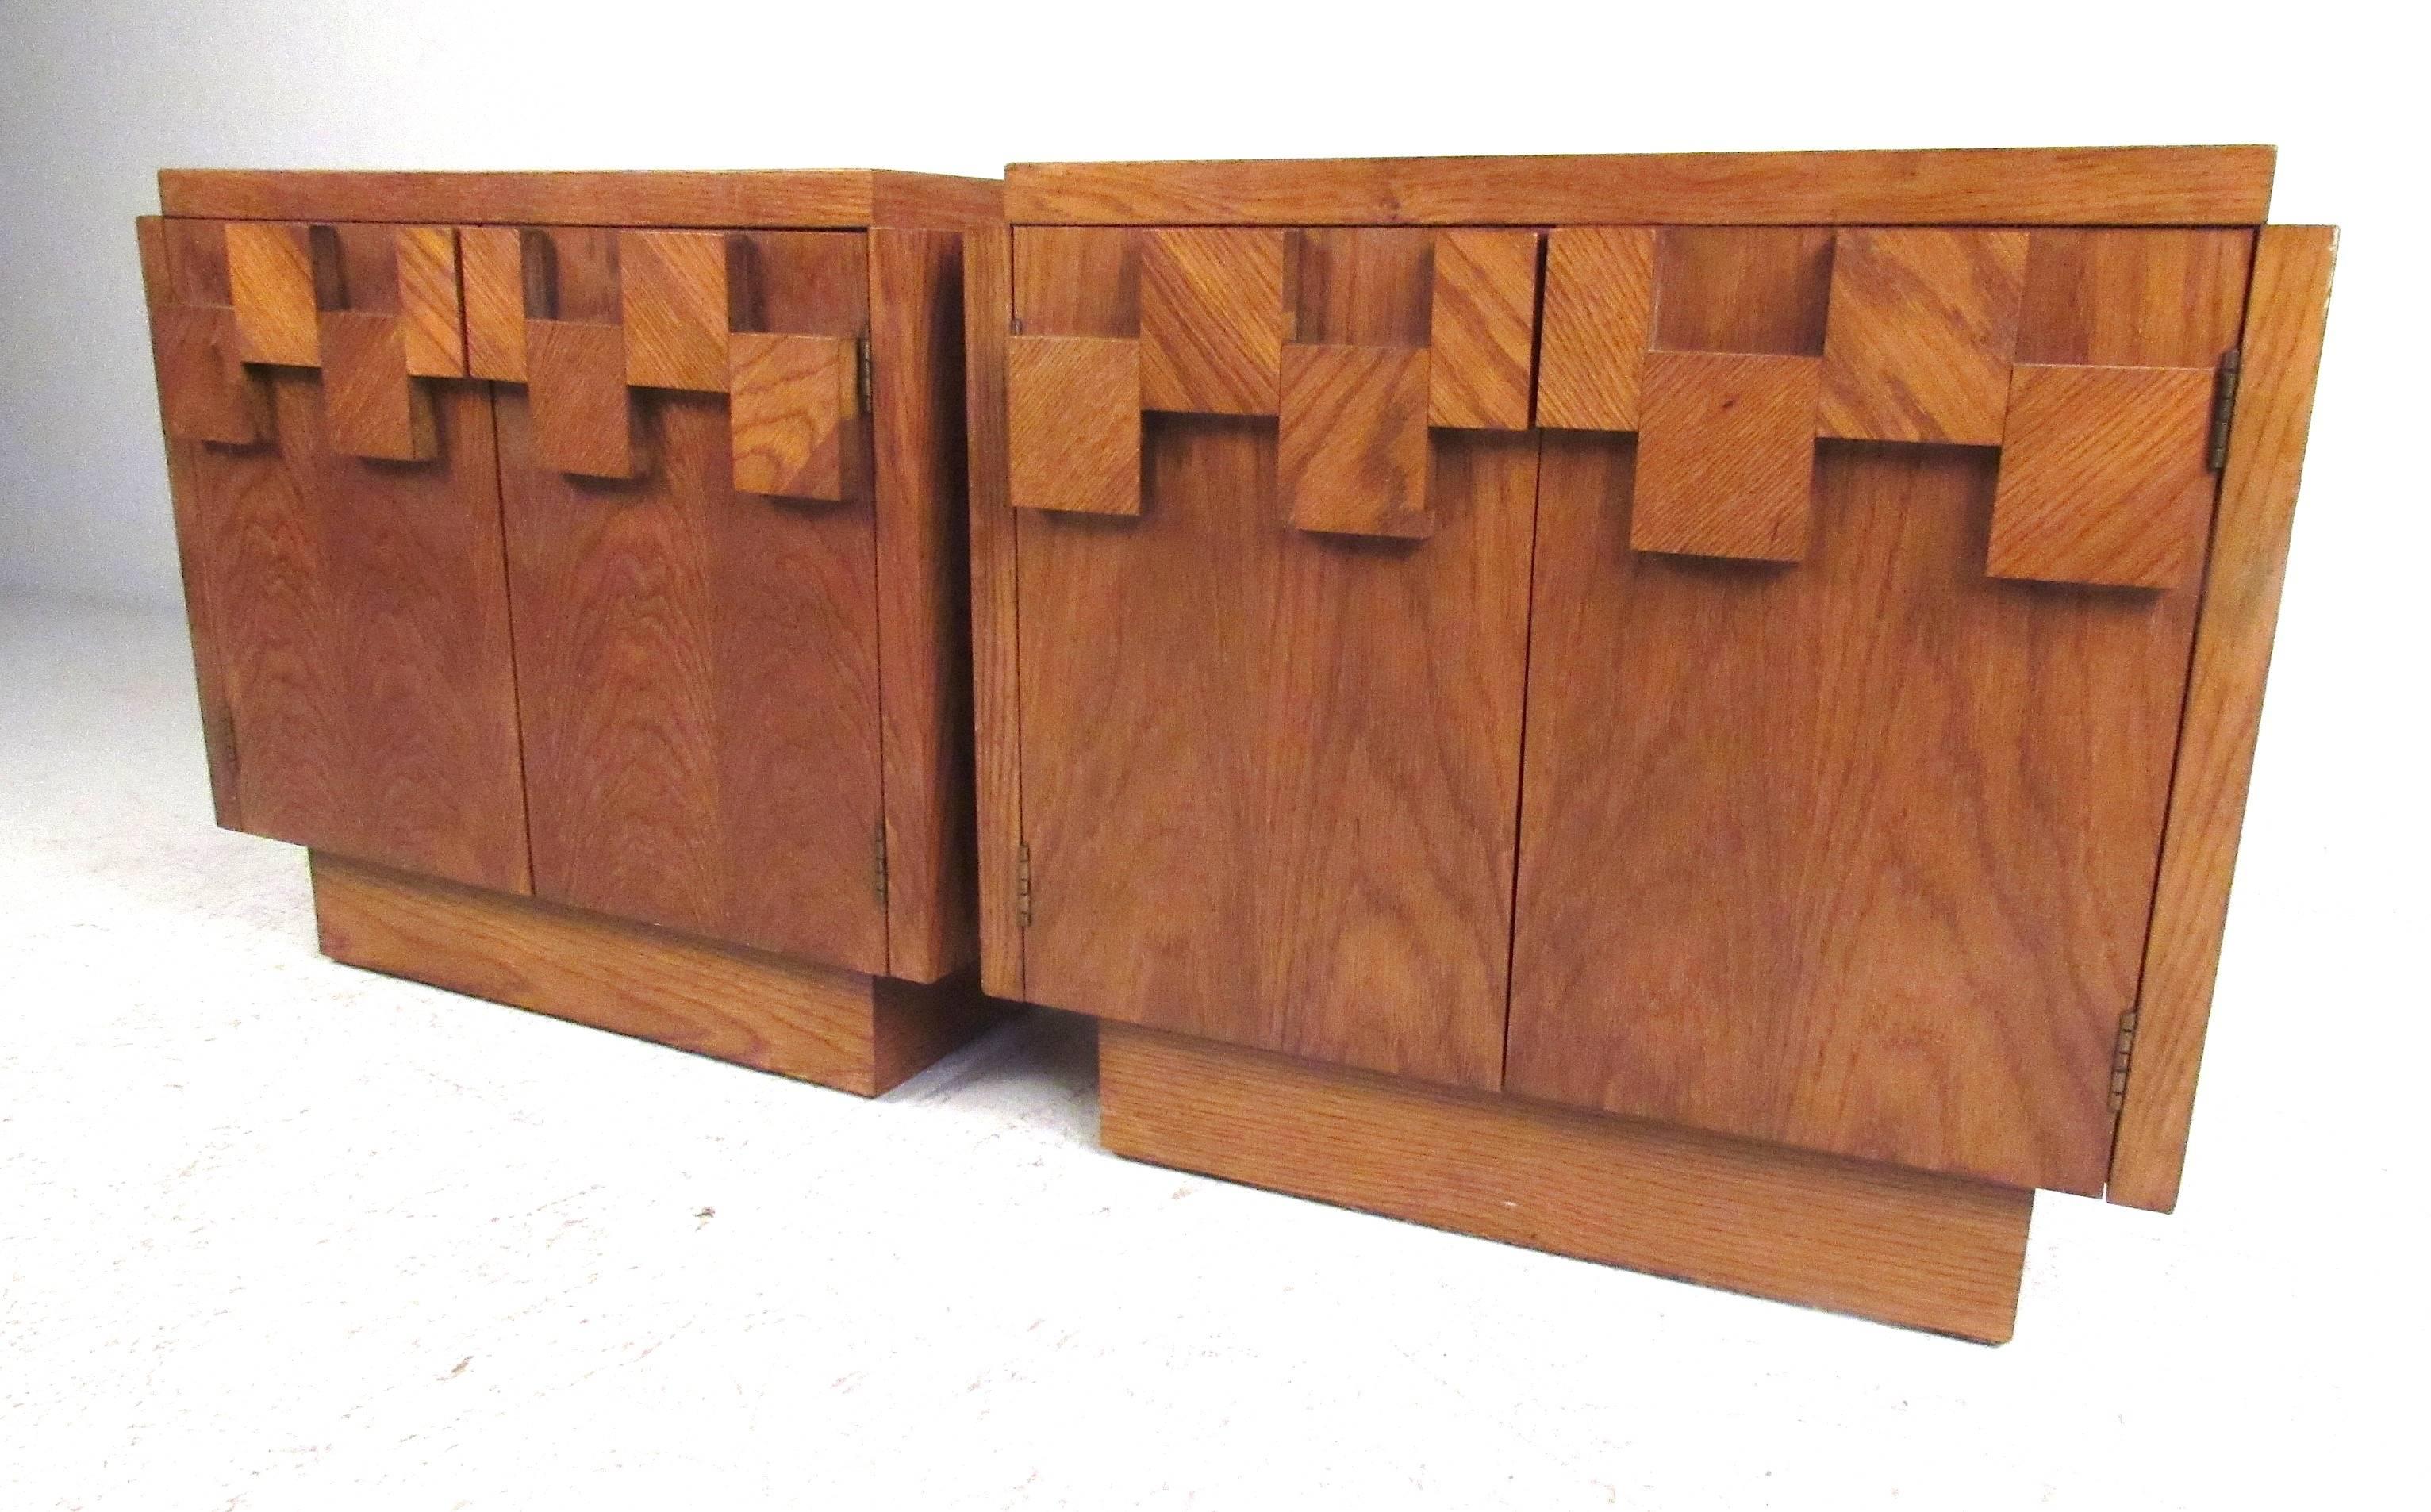 Pair of Lane Altavista Brutalist nightstands from the Mosaic collection. Matching chifferobe, dresser and headboard are available. Please confirm item location (NY or NJ) with dealer.